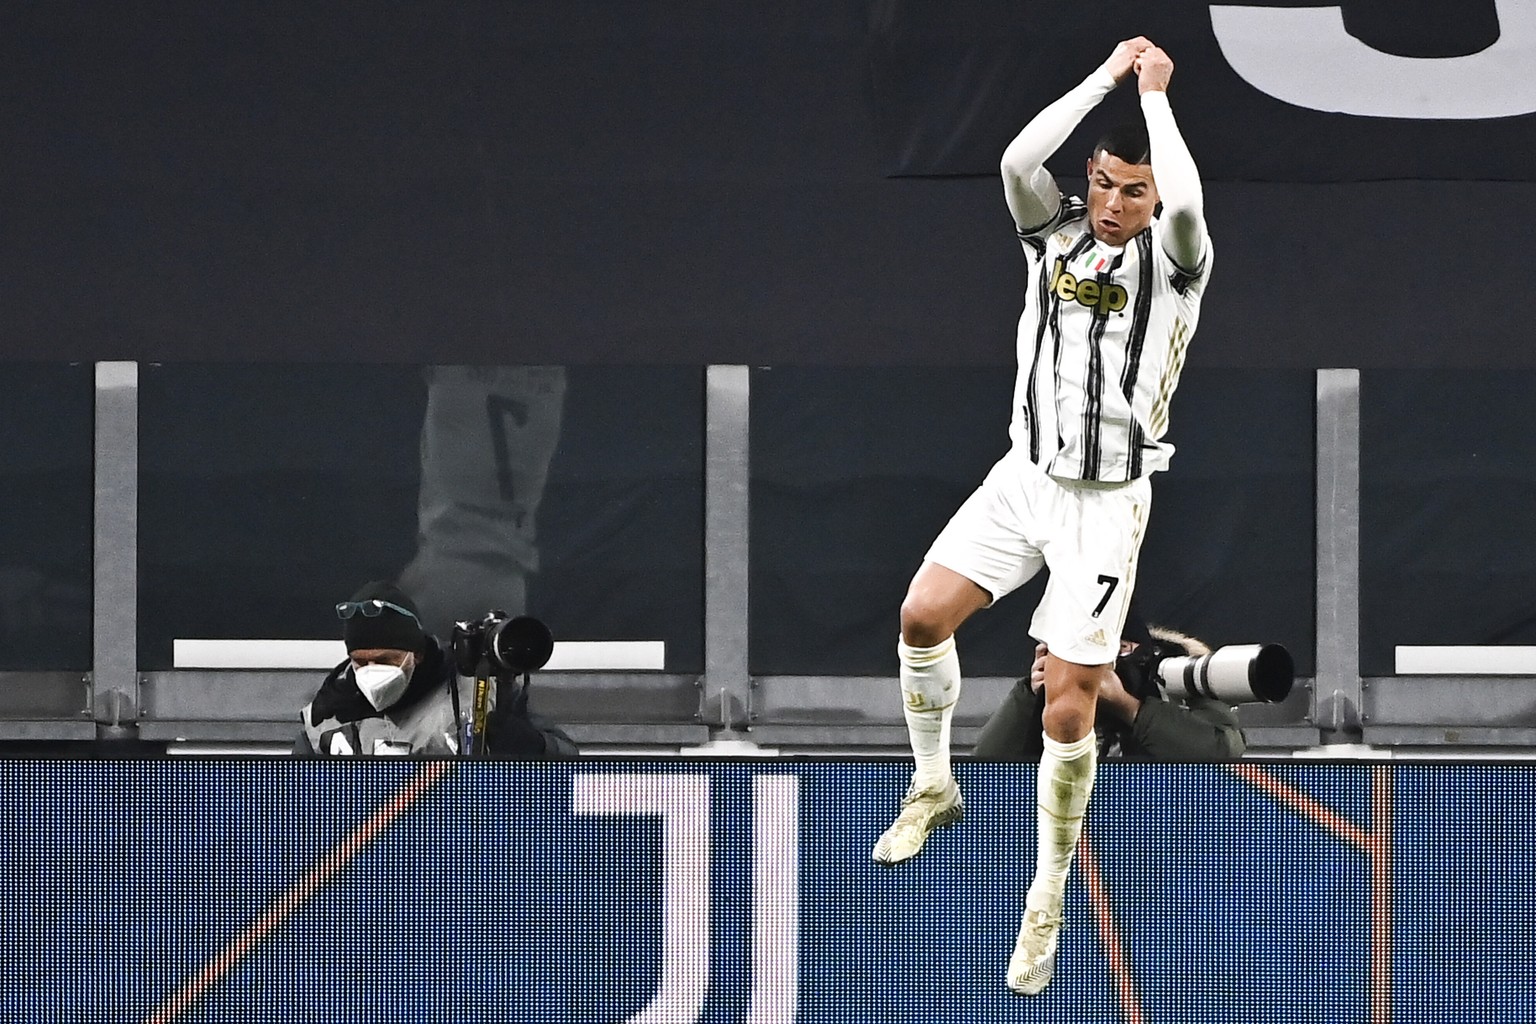 Cristiano Ronaldo of Juventus celebrates after scoring 3-0 during the Italian Serie A soccer match between Juventus and Udinese at the Allianz Stadium in Turin, Italy, Sunday Jan. 3, 2021. (Marco Alpo ...